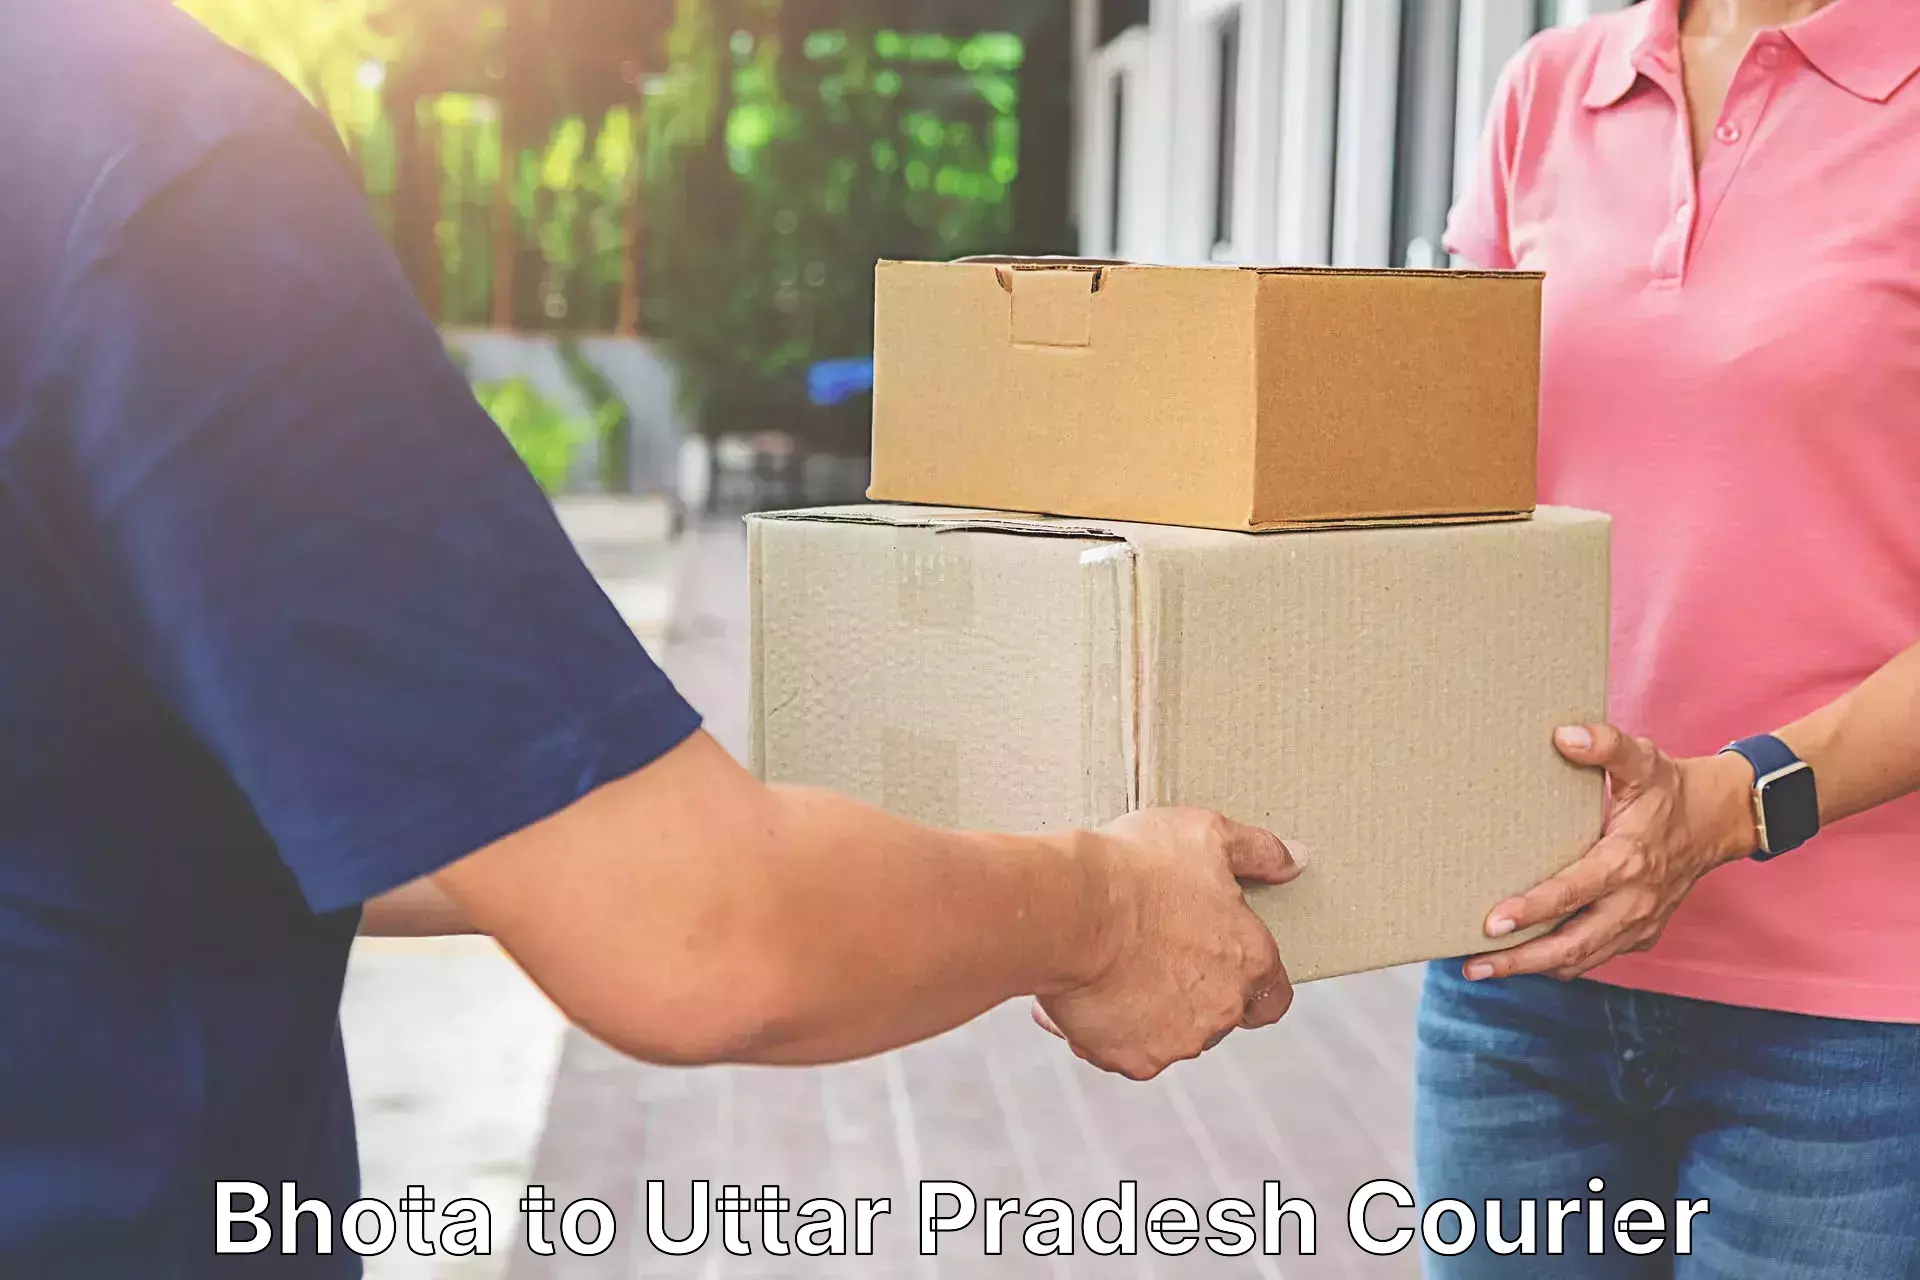 Global courier networks Bhota to Cholapur